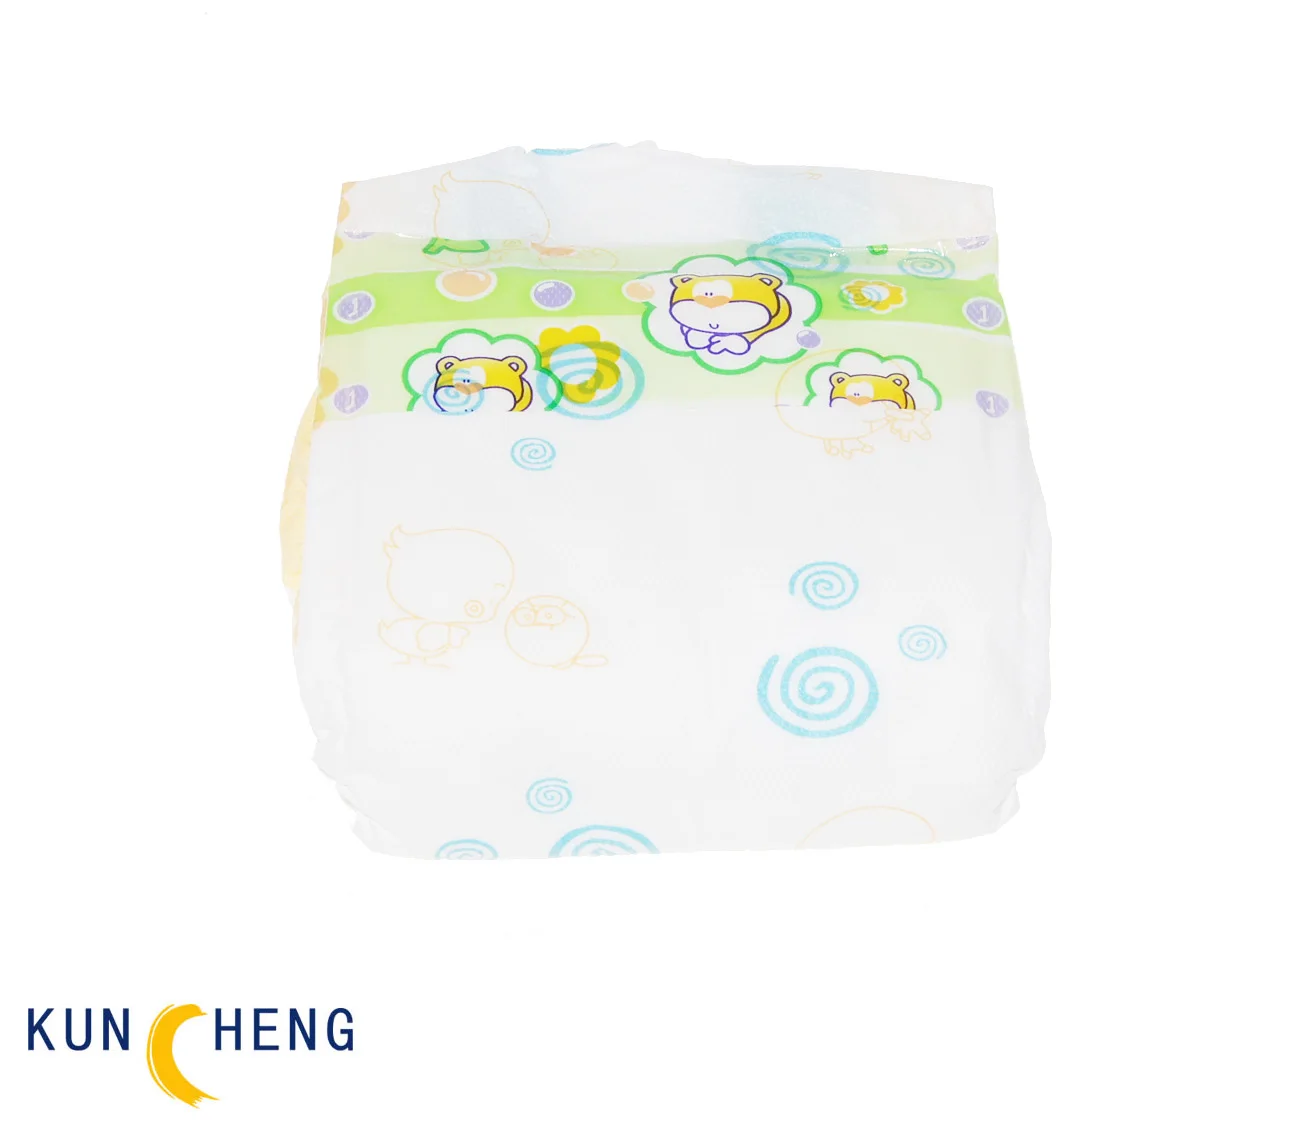 
baby diapers super thin soft touch adult diaper non woven breathable disposable high absorbability no leakage size m 25g/5g  (62541264331)